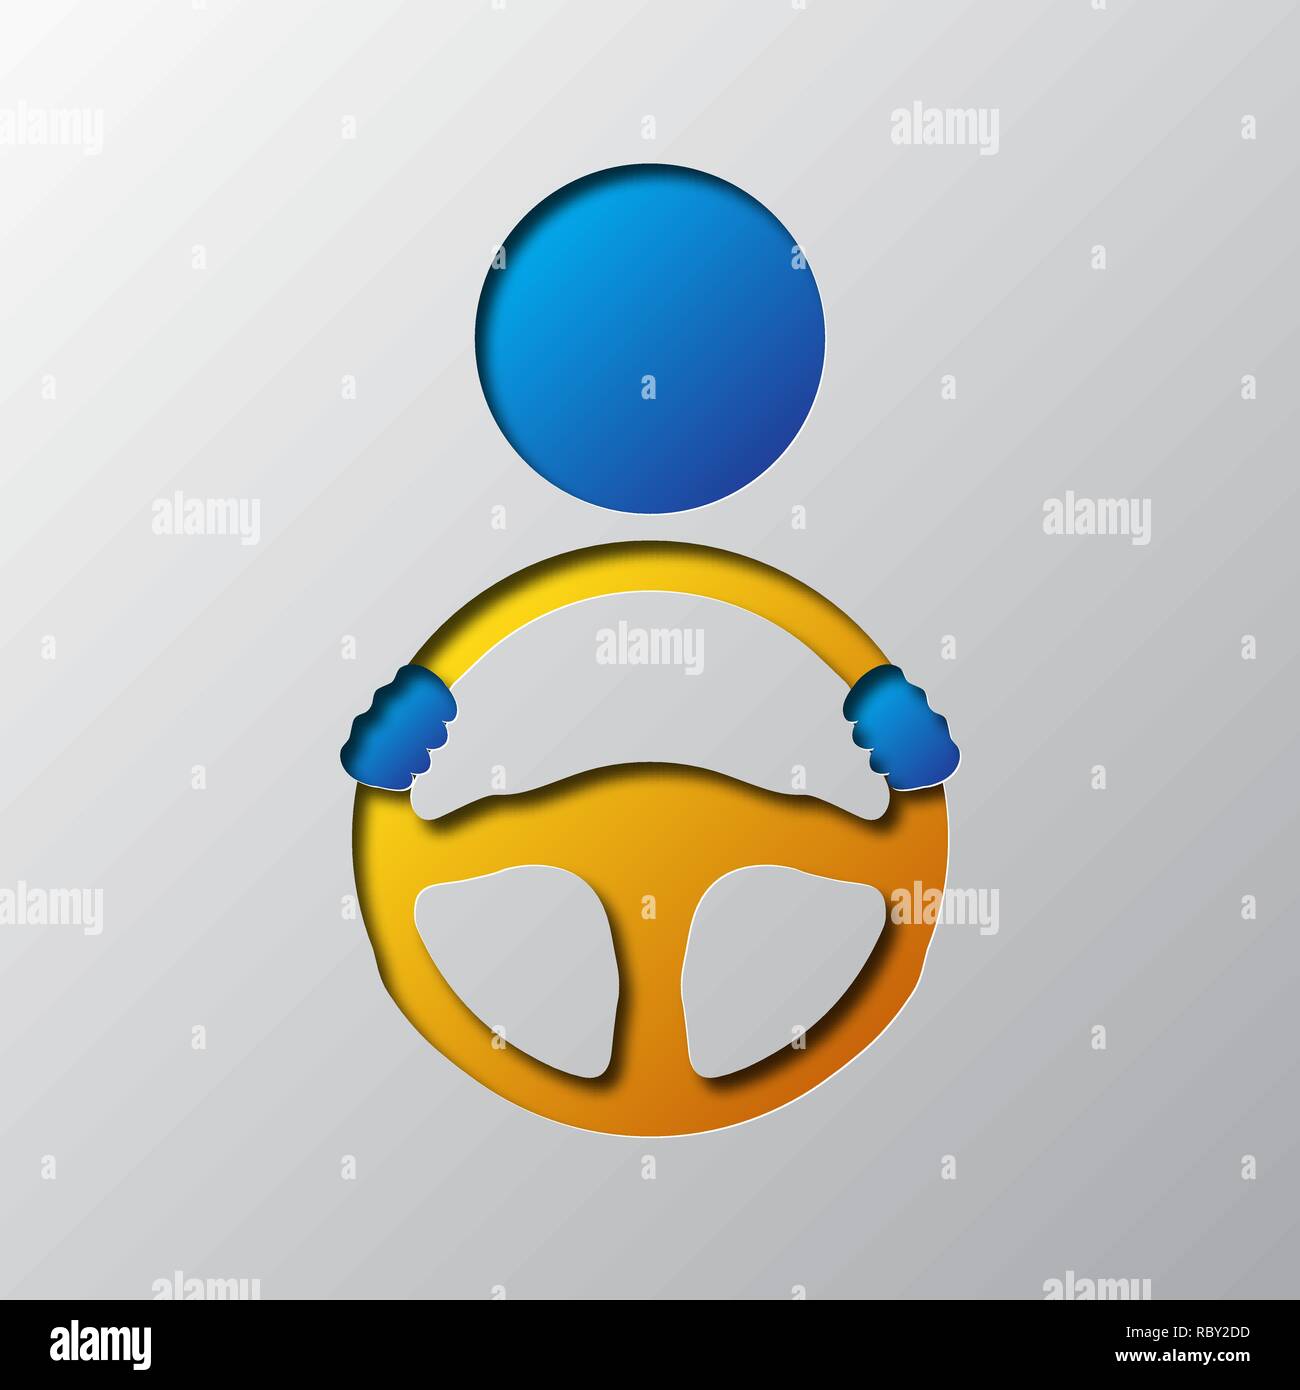 Schematic drawing of the driver behind the wheel. Vector illustration. Steering wheel icon is cut from the paper. Stock Vector